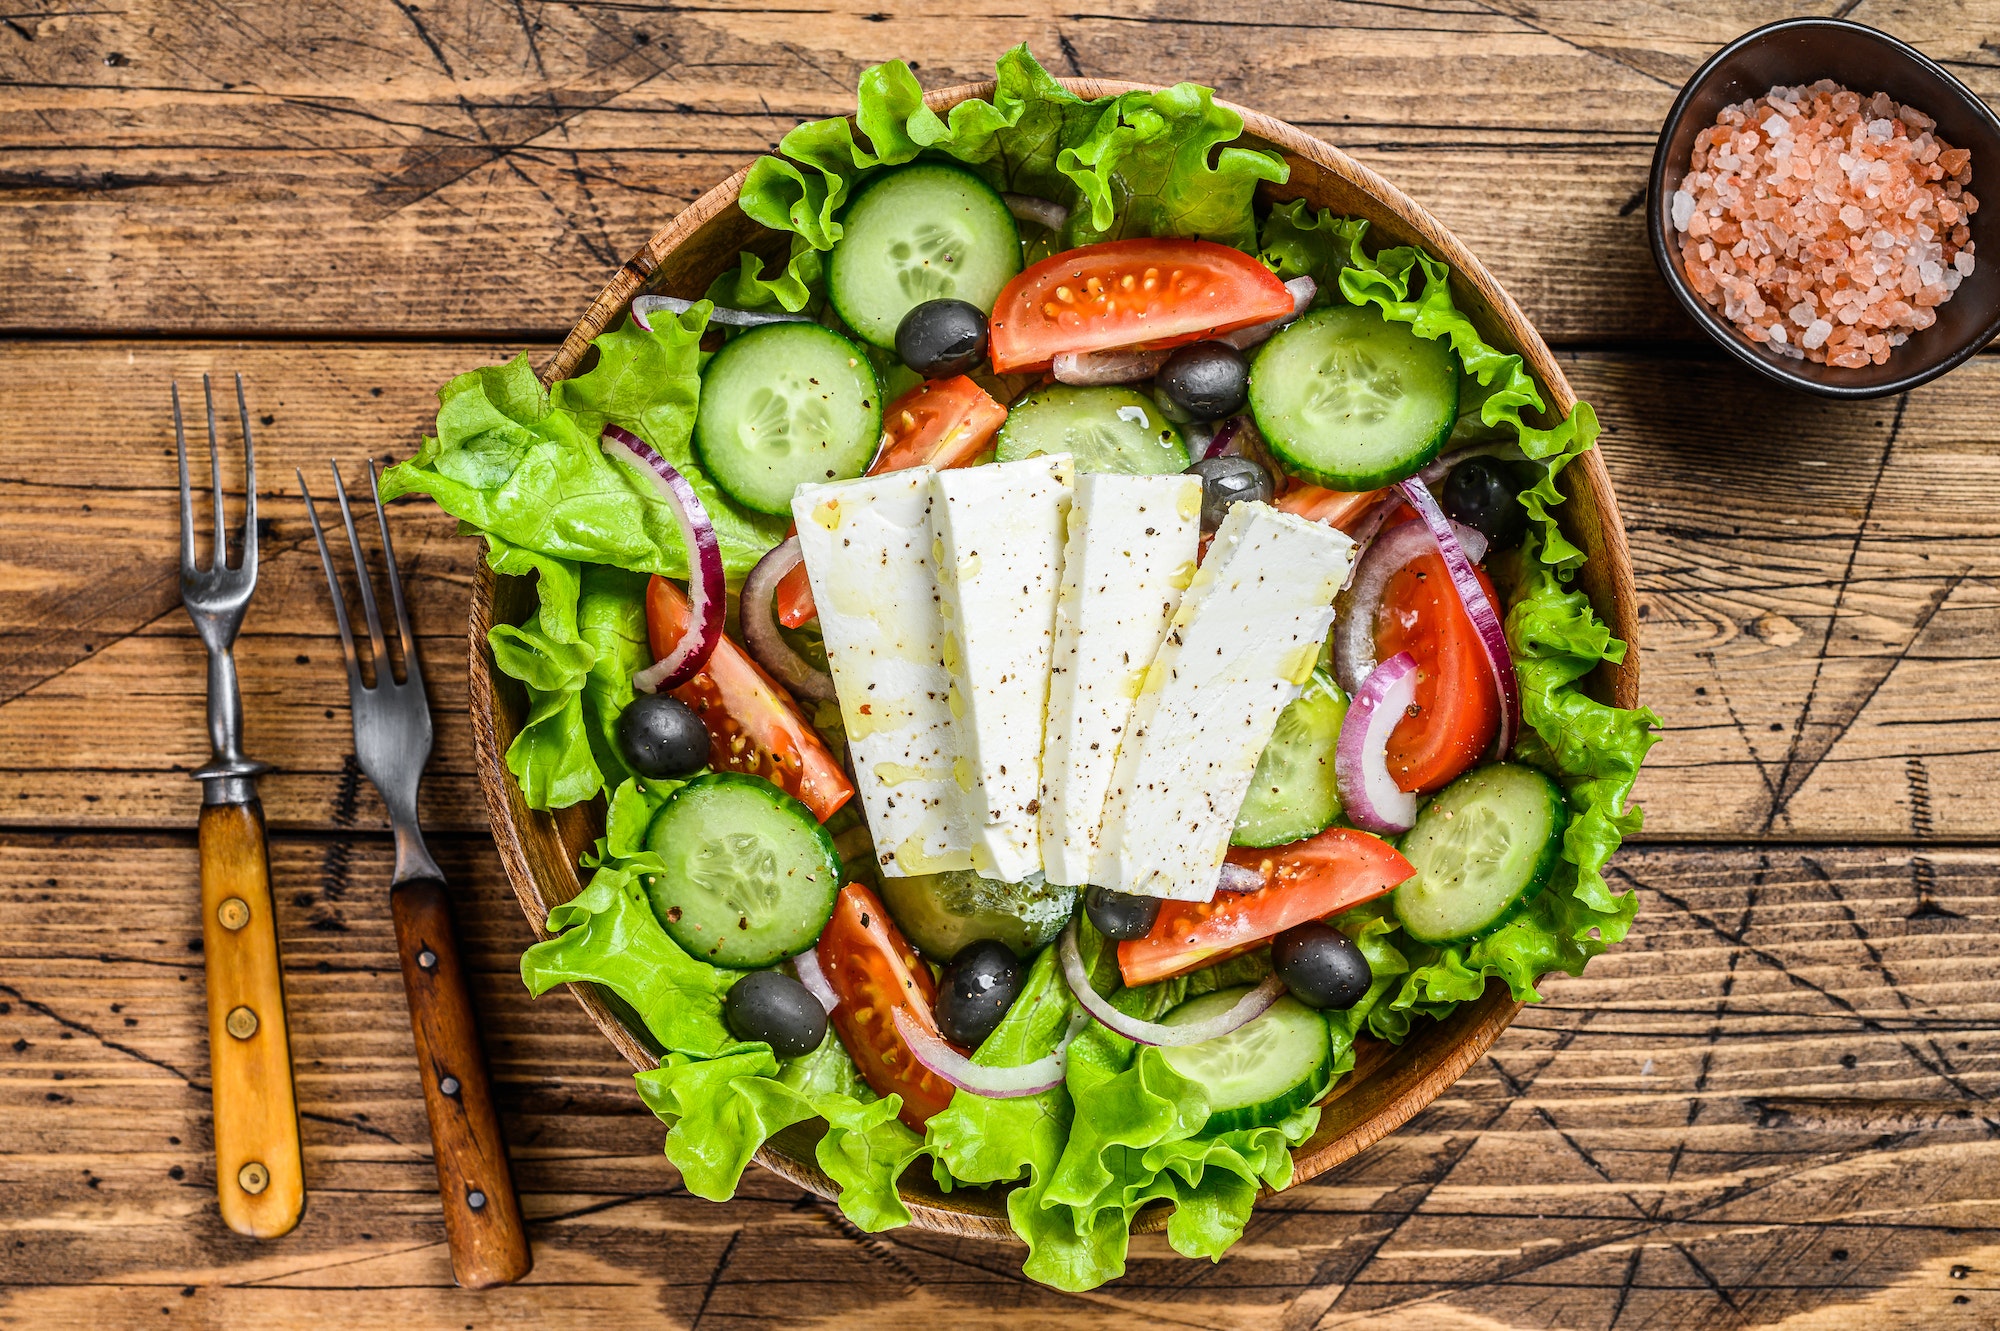 Greek salad with fresh vegetables and feta cheese. Wooden background. Top view